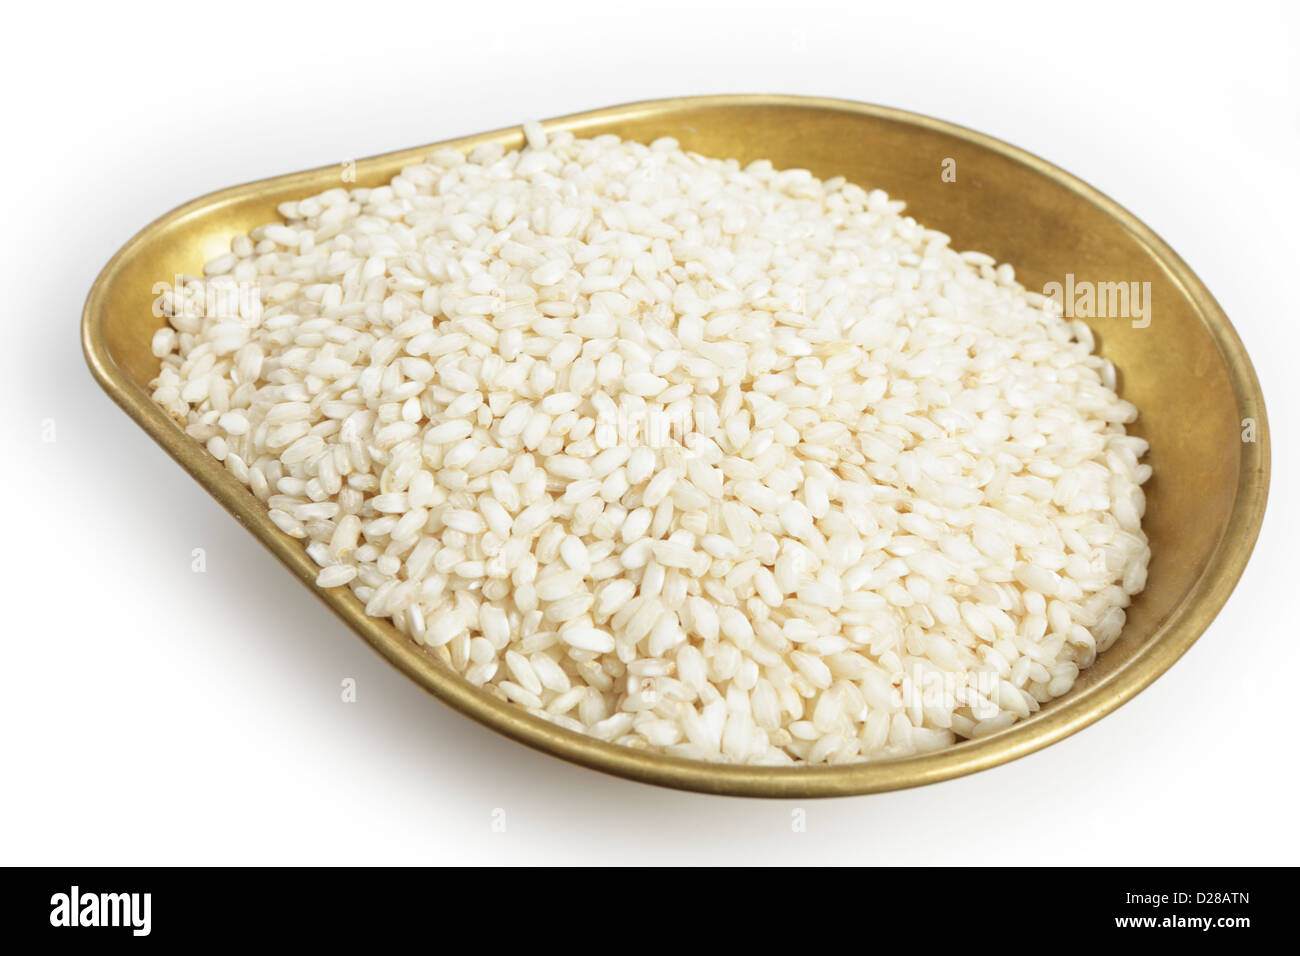 A pile of 460grams (one pound) of arborio Italian rice in the weighing pan from a set of scales, with a light shadow over white. Stock Photo